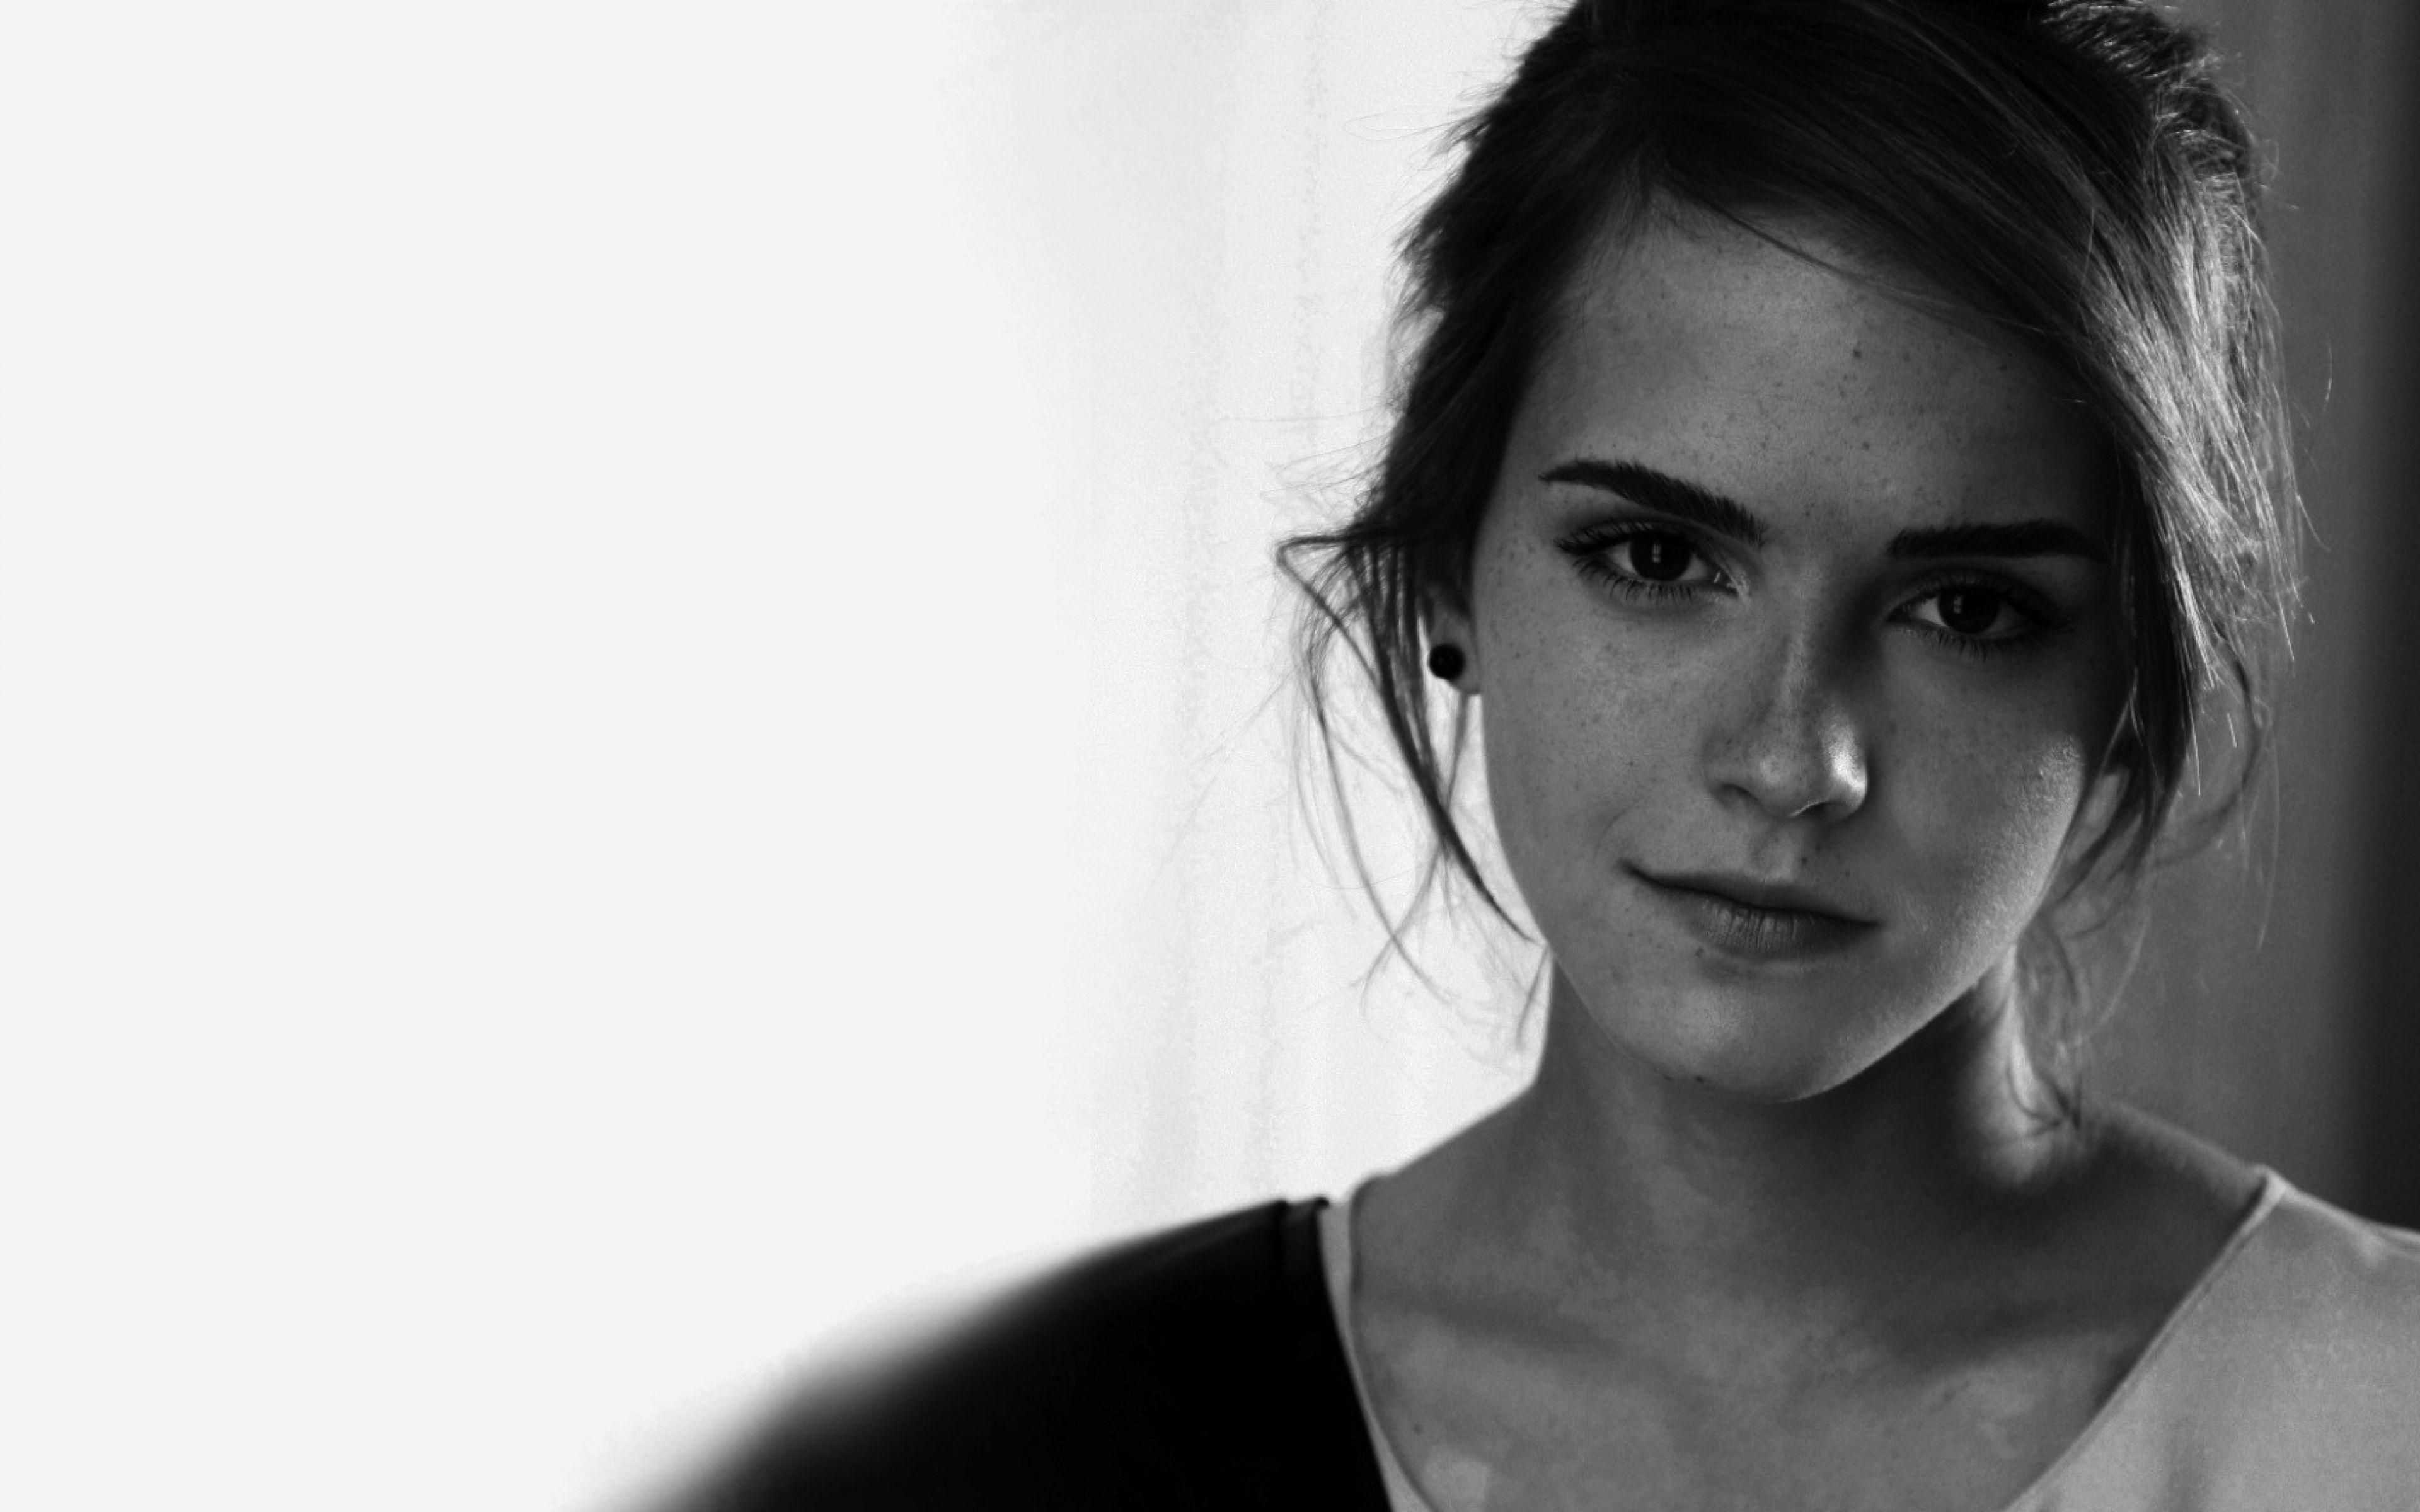 Emma Watson's safety-driven offshore company revealed